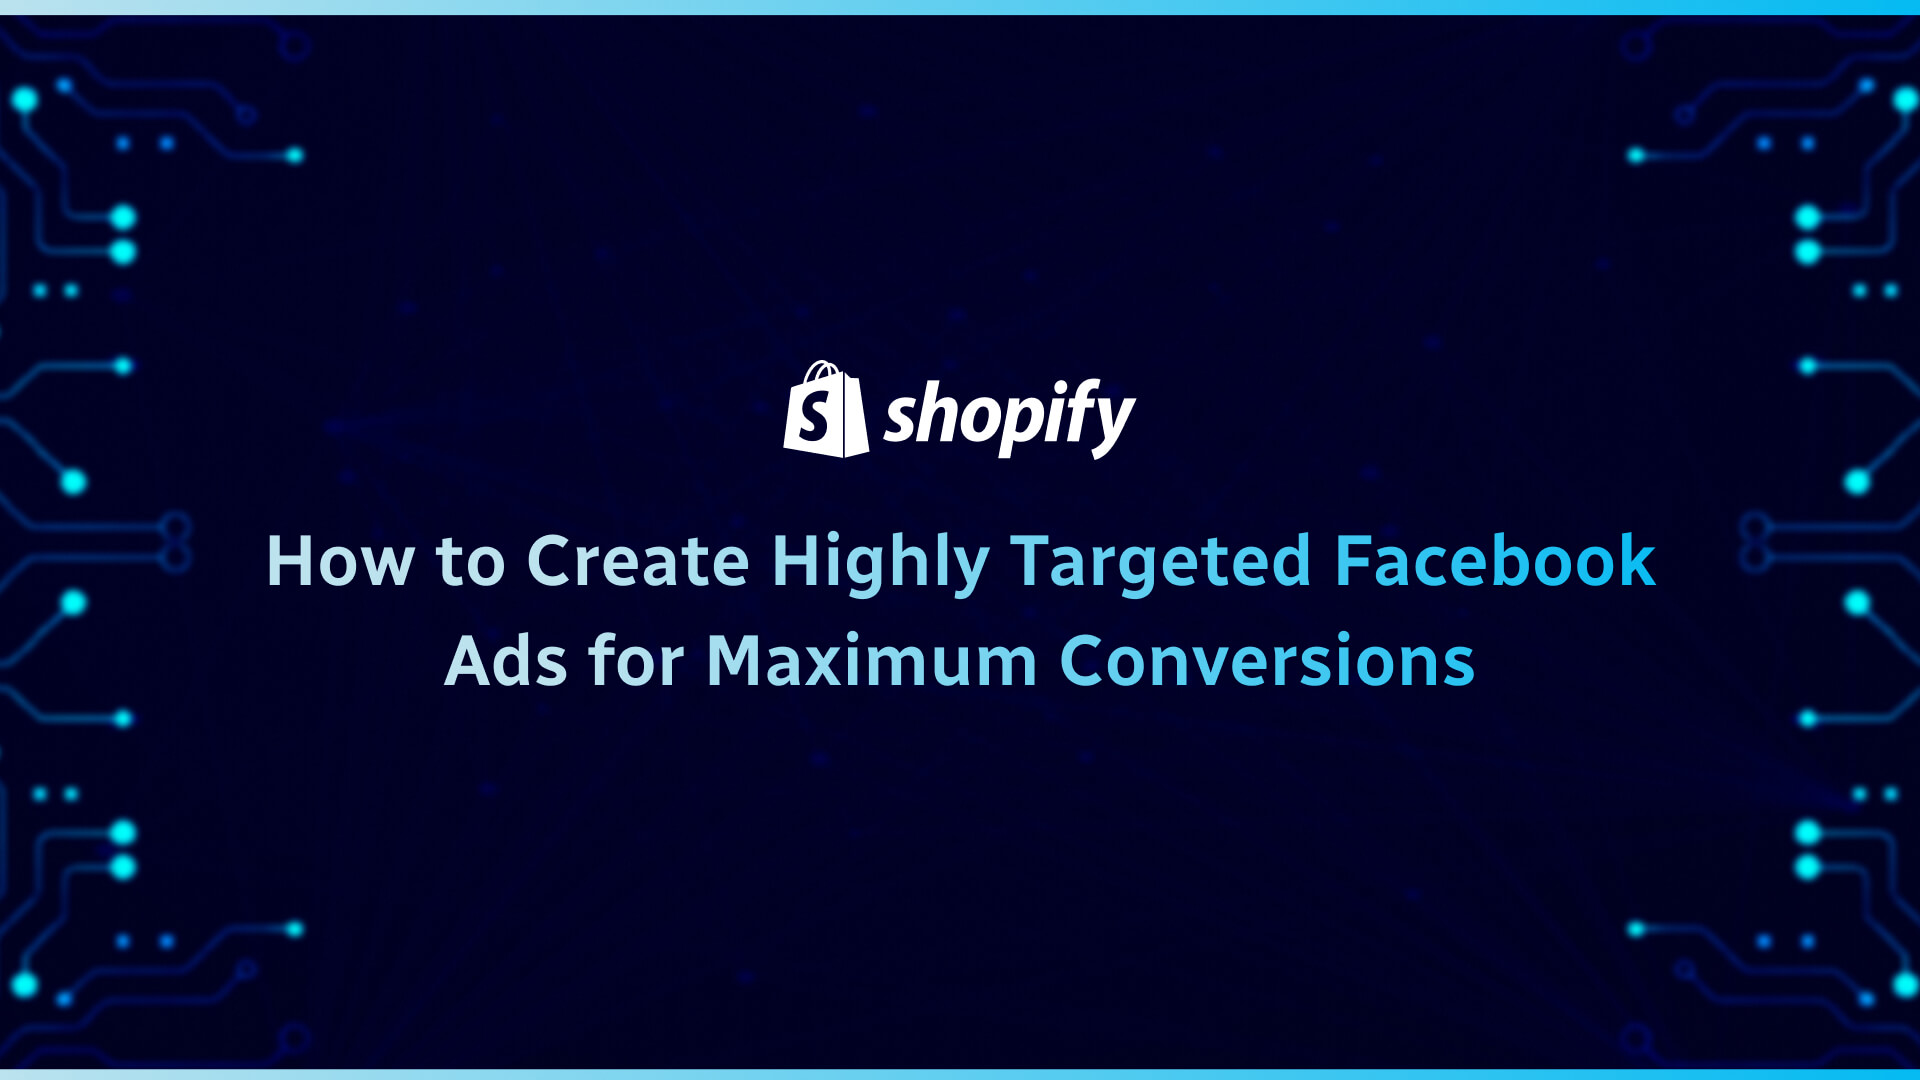 How to Create Highly Targeted Facebook Ads for Maximum Conversions